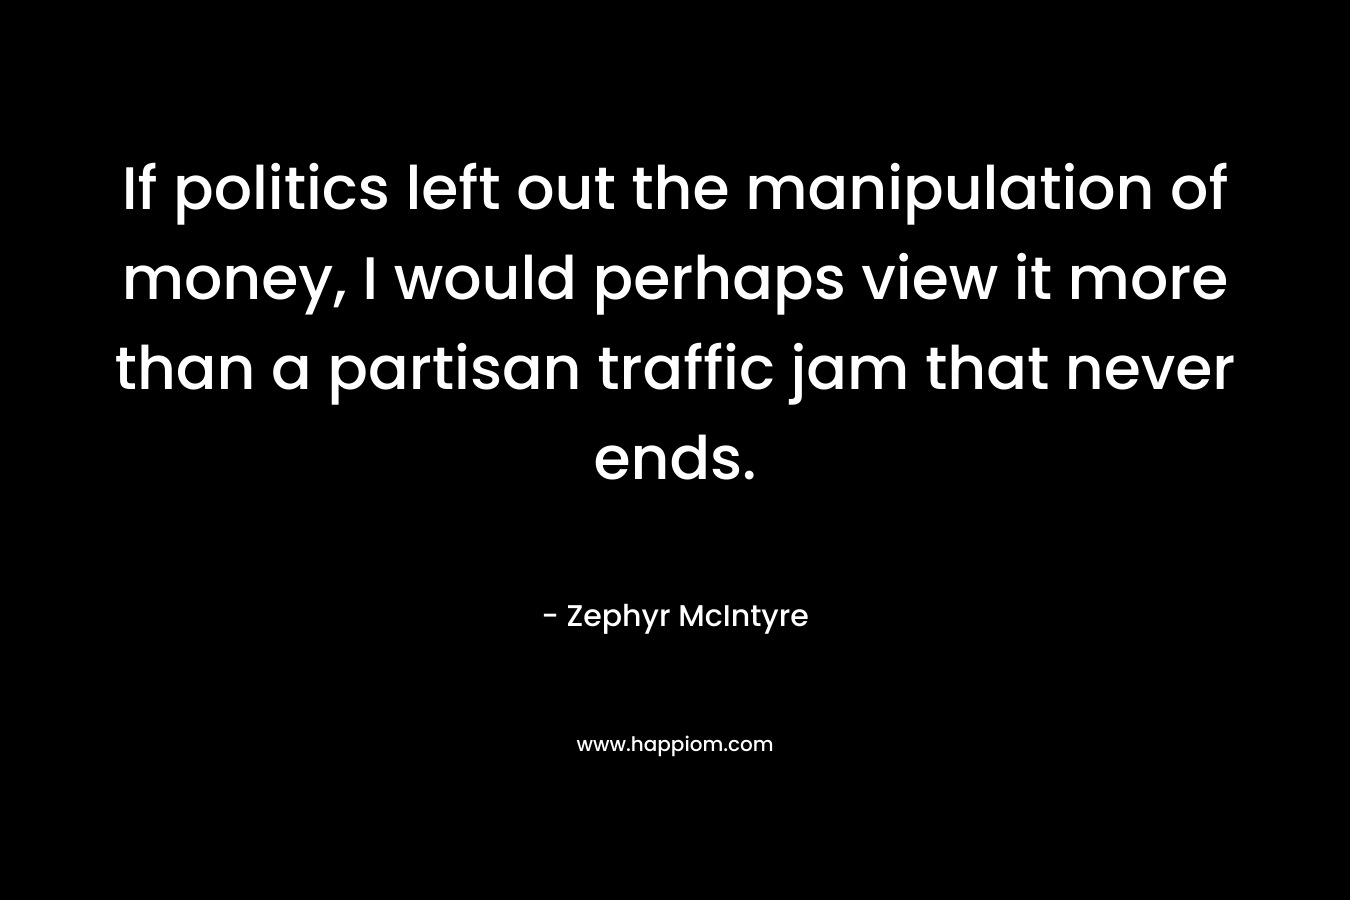 If politics left out the manipulation of money, I would perhaps view it more than a partisan traffic jam that never ends. – Zephyr McIntyre